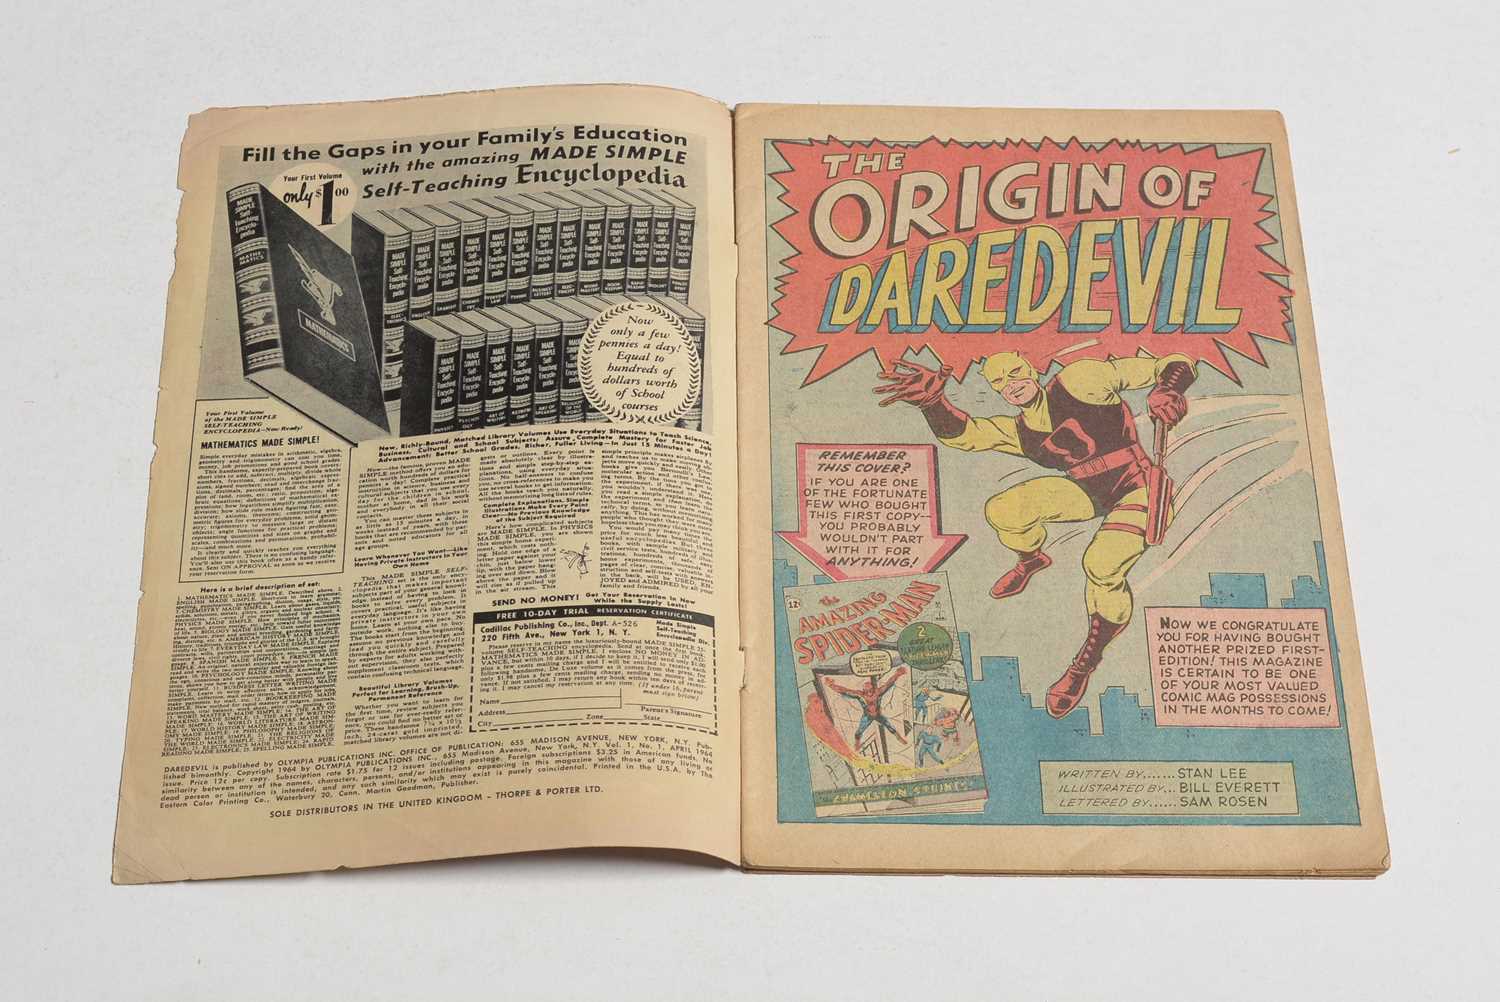 Daredevil No. 1 by Marvel Comics - Image 4 of 8